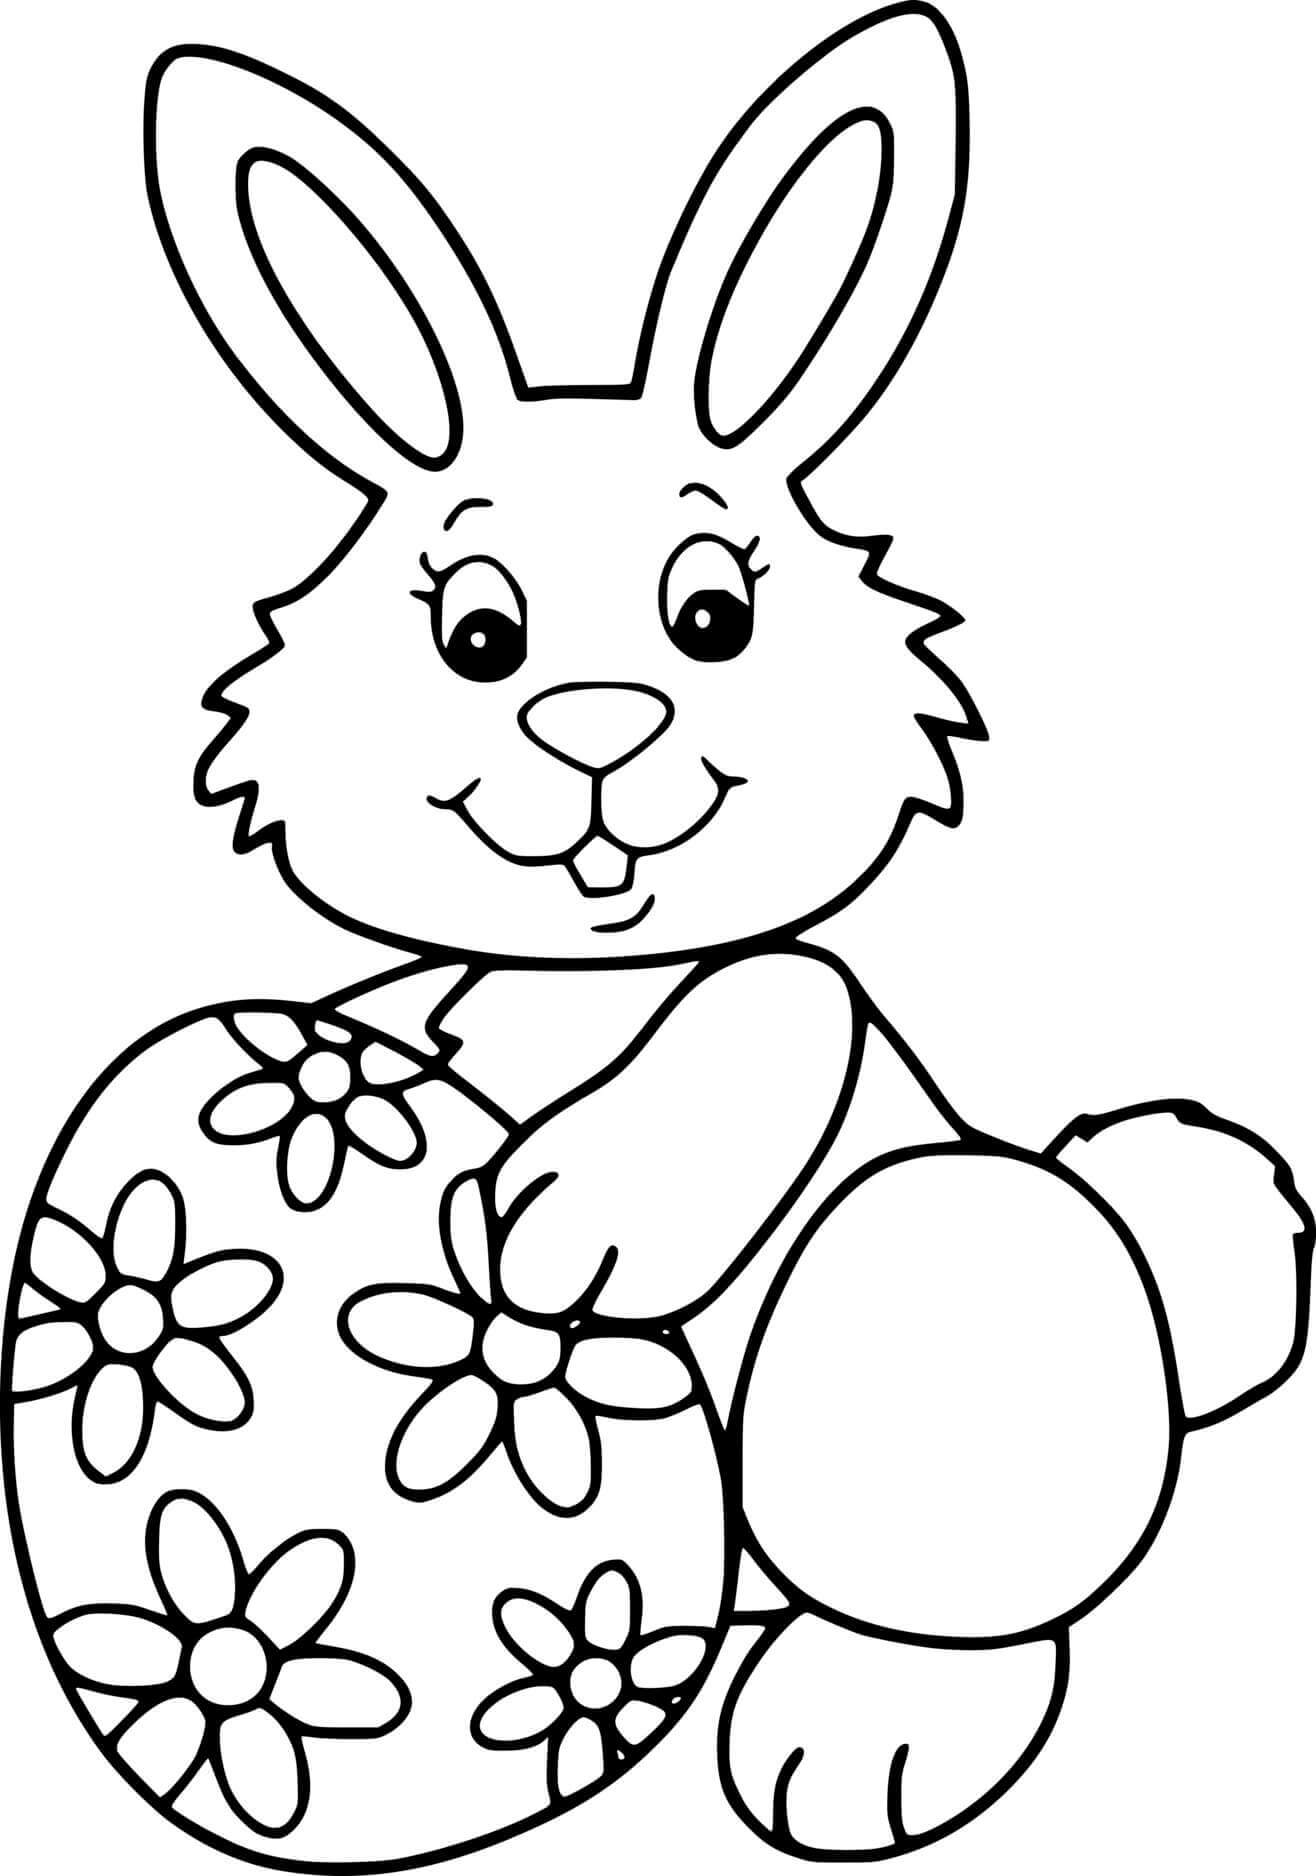 Little Easter Bunny Holds A Big Egg Coloring Page